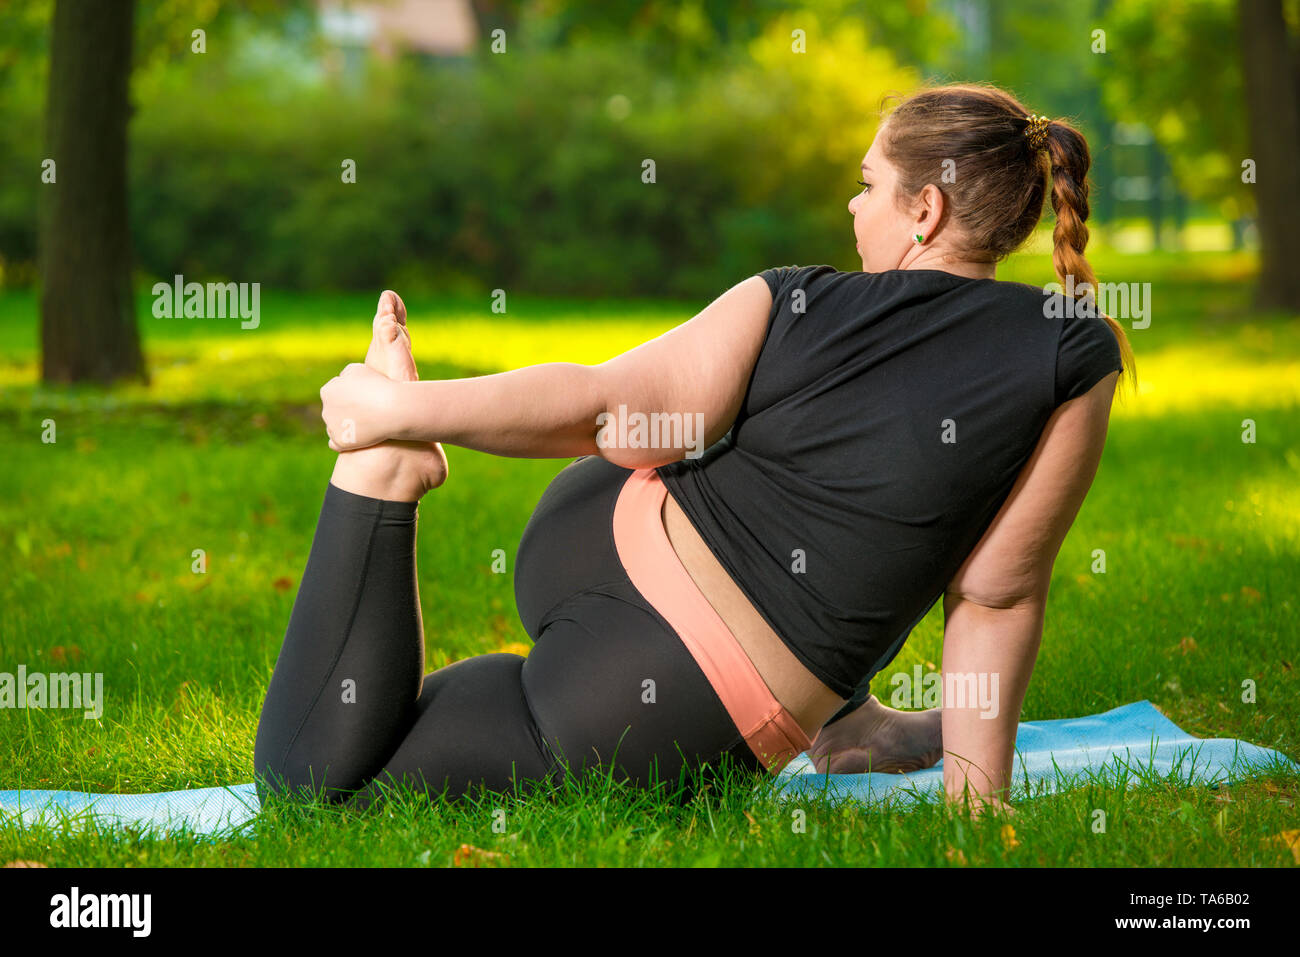 Asian Fat Woman Doing Exercise And Stretching By Yoga On The Grass